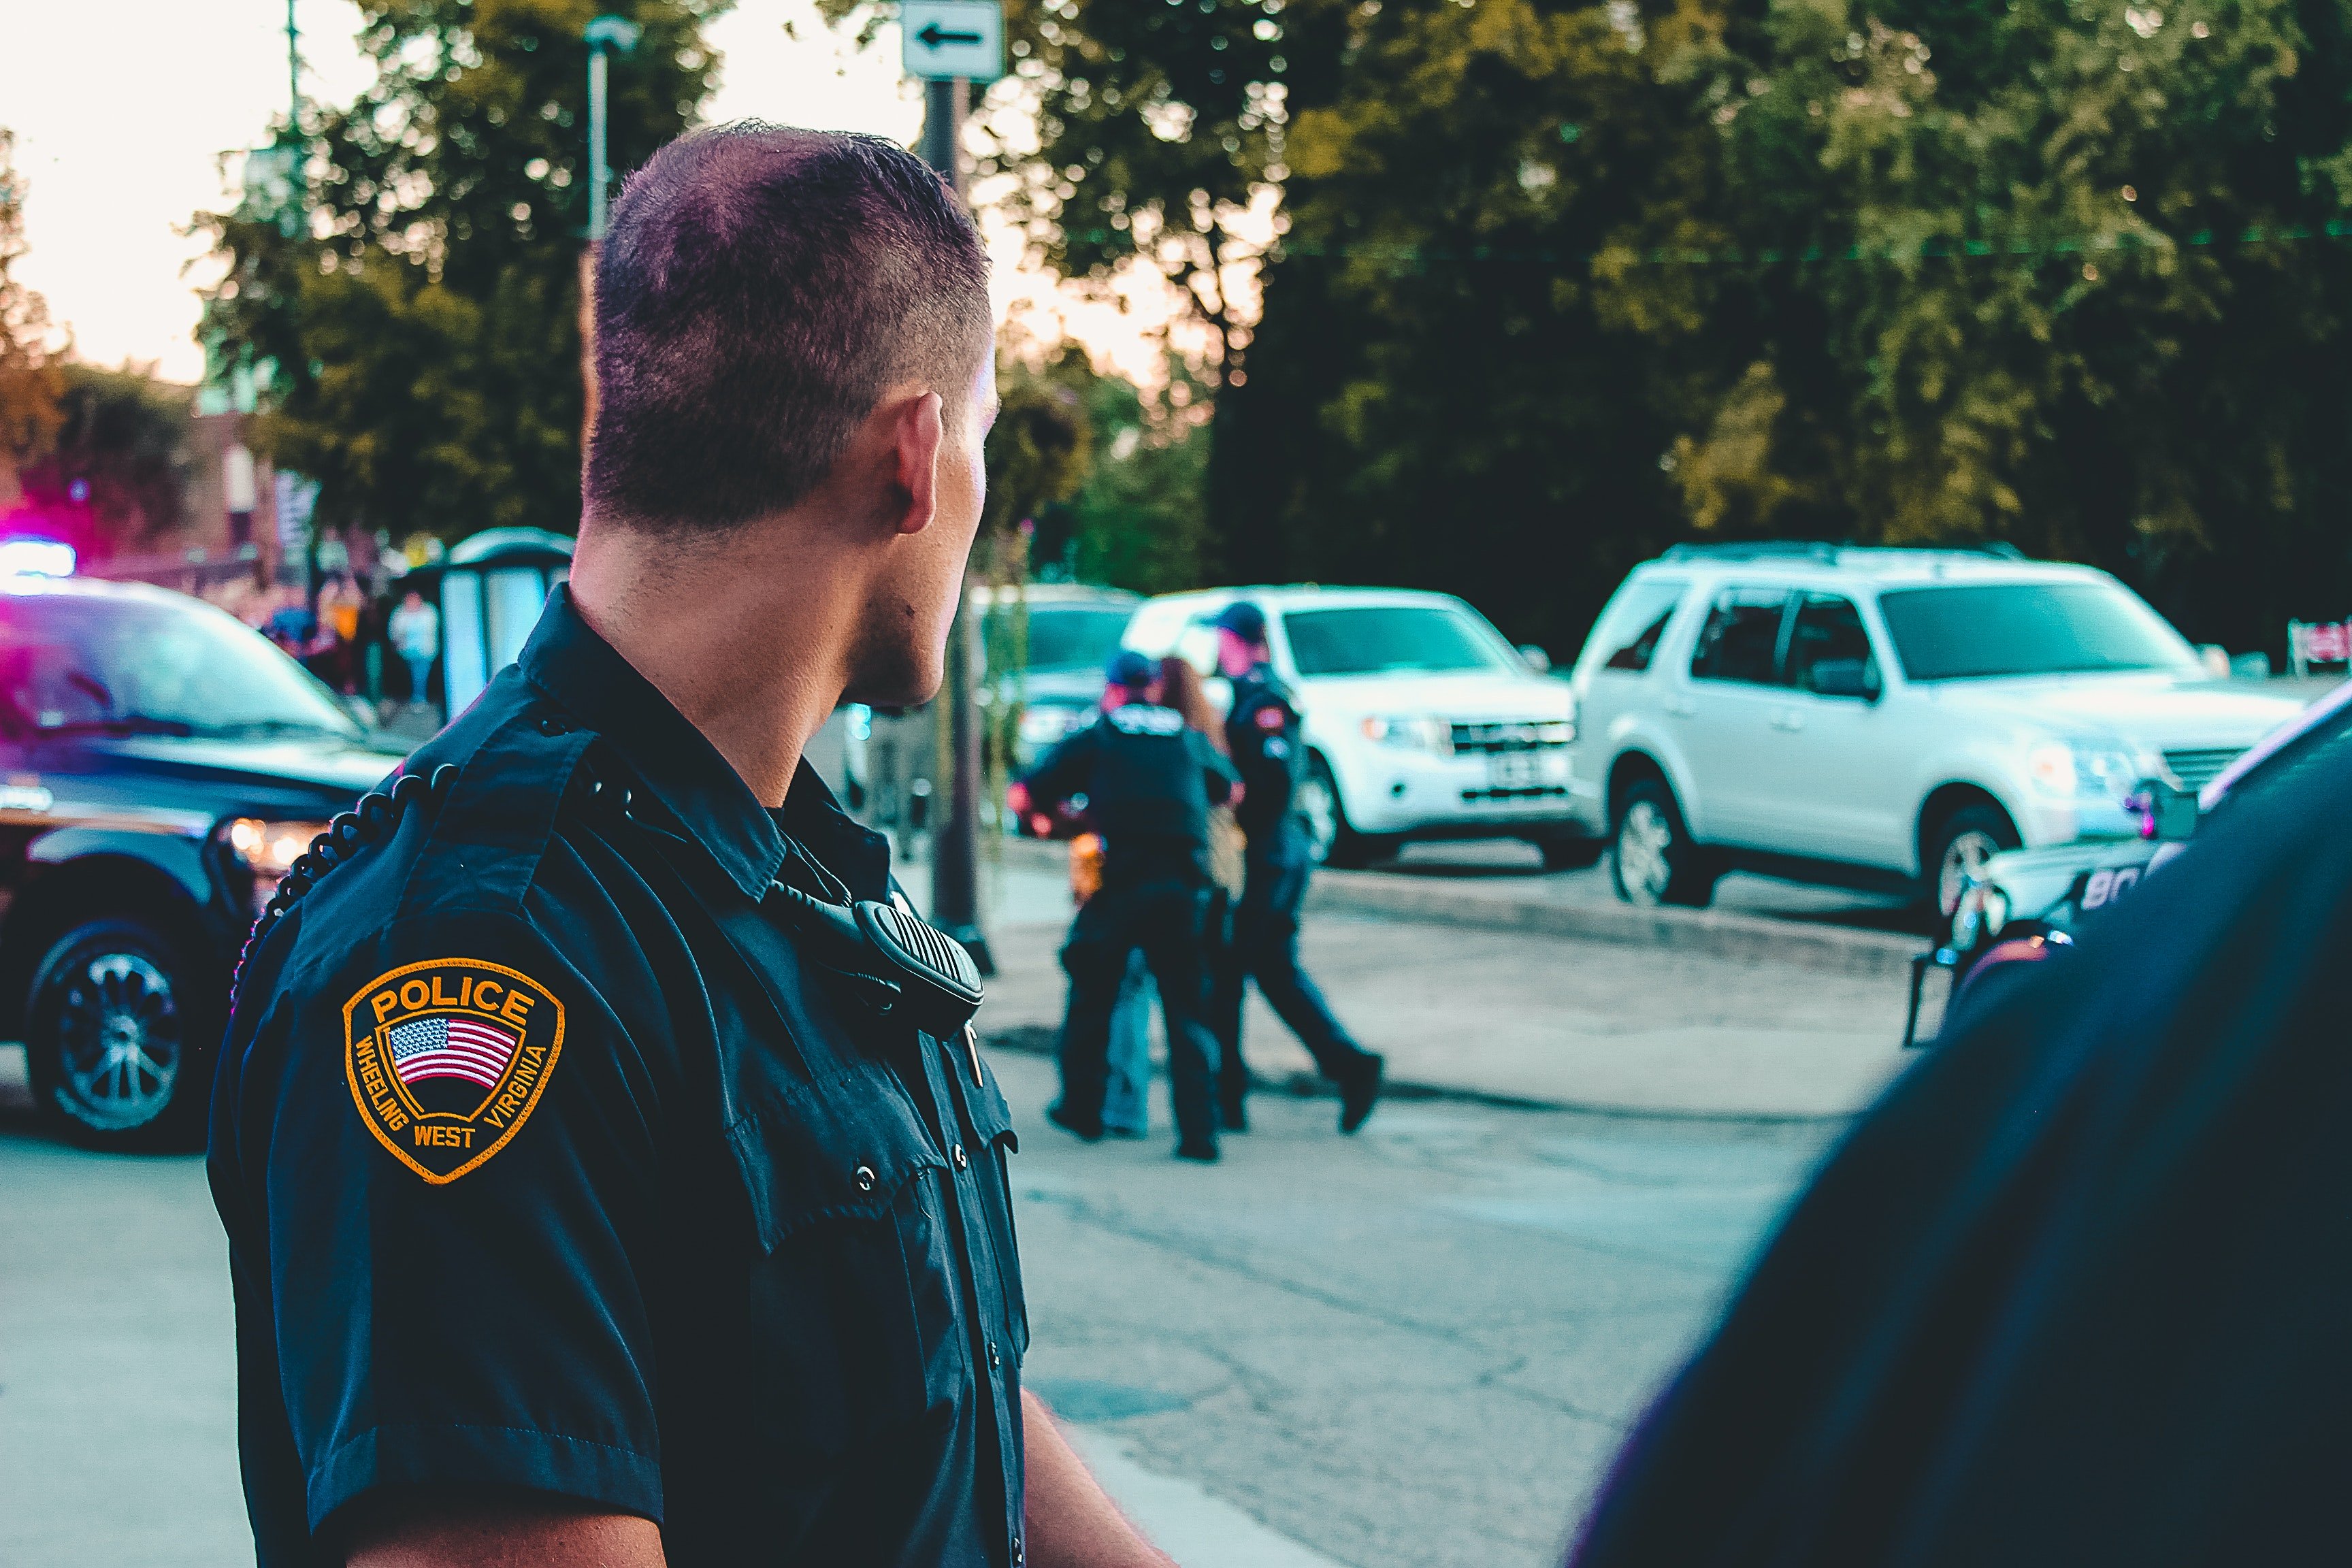 A police officer during duty | Photo: Pexels